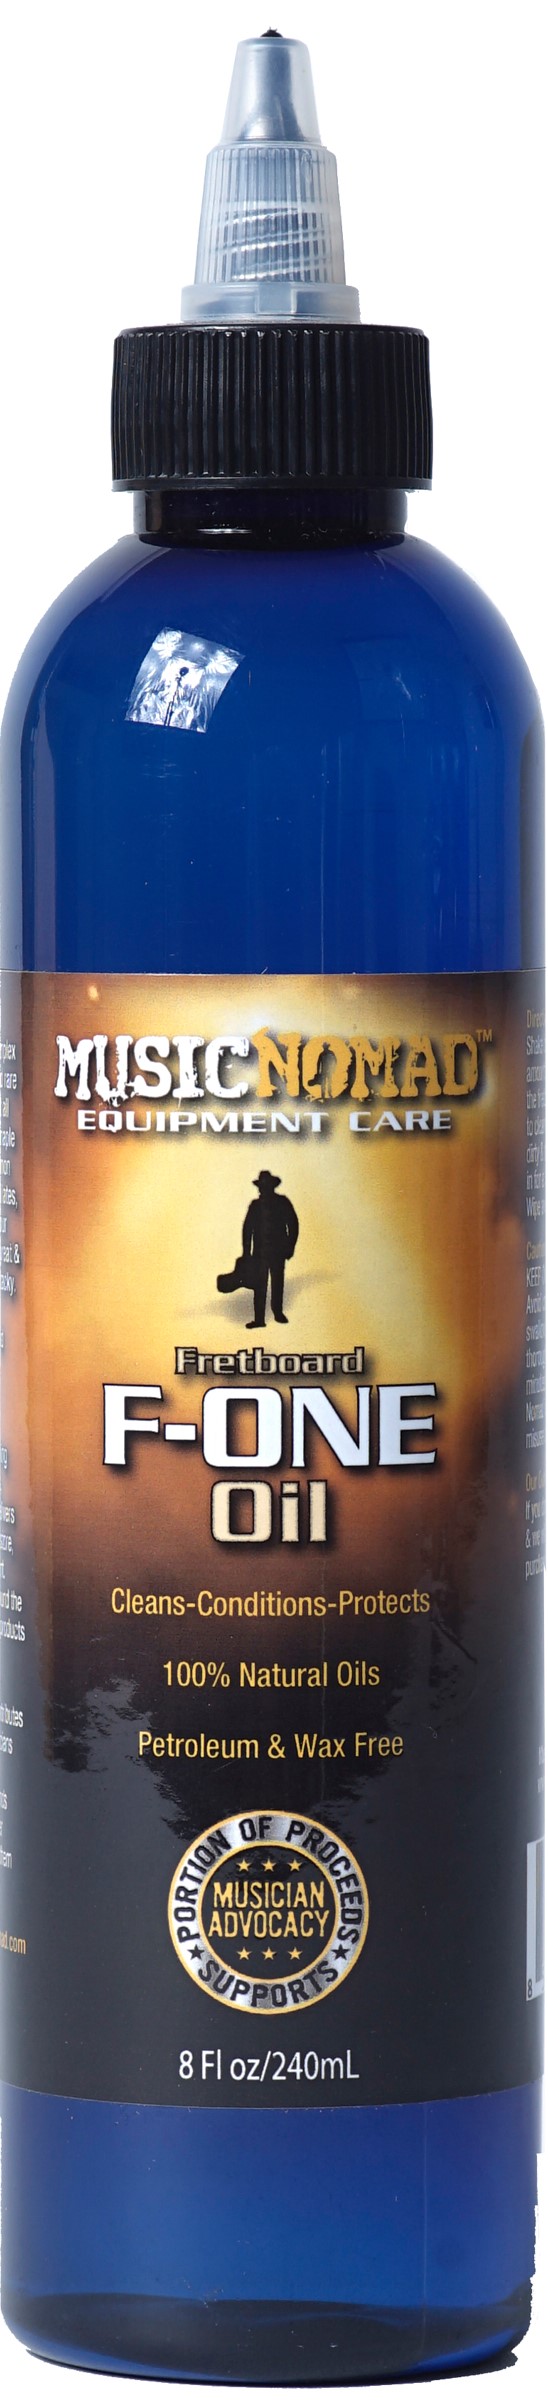 Music-Nomad Fretboard F-ONE Oil Tech Size